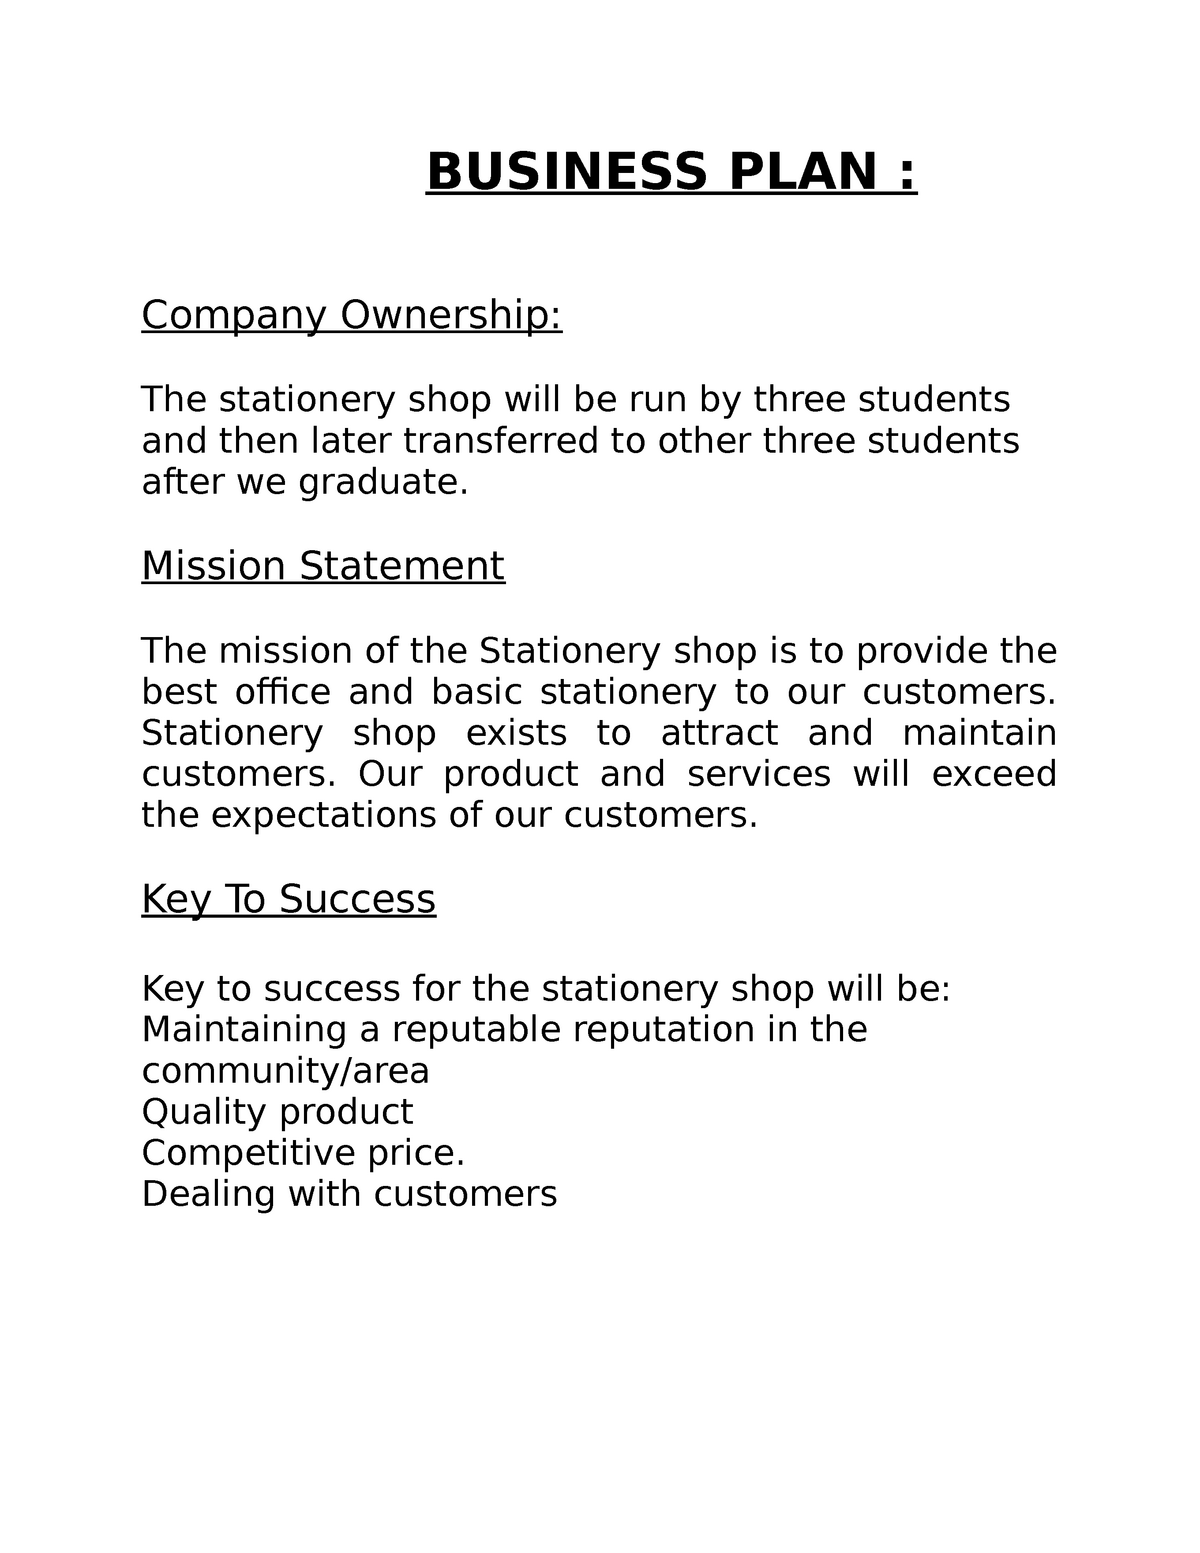 stationery business plan in ethiopia